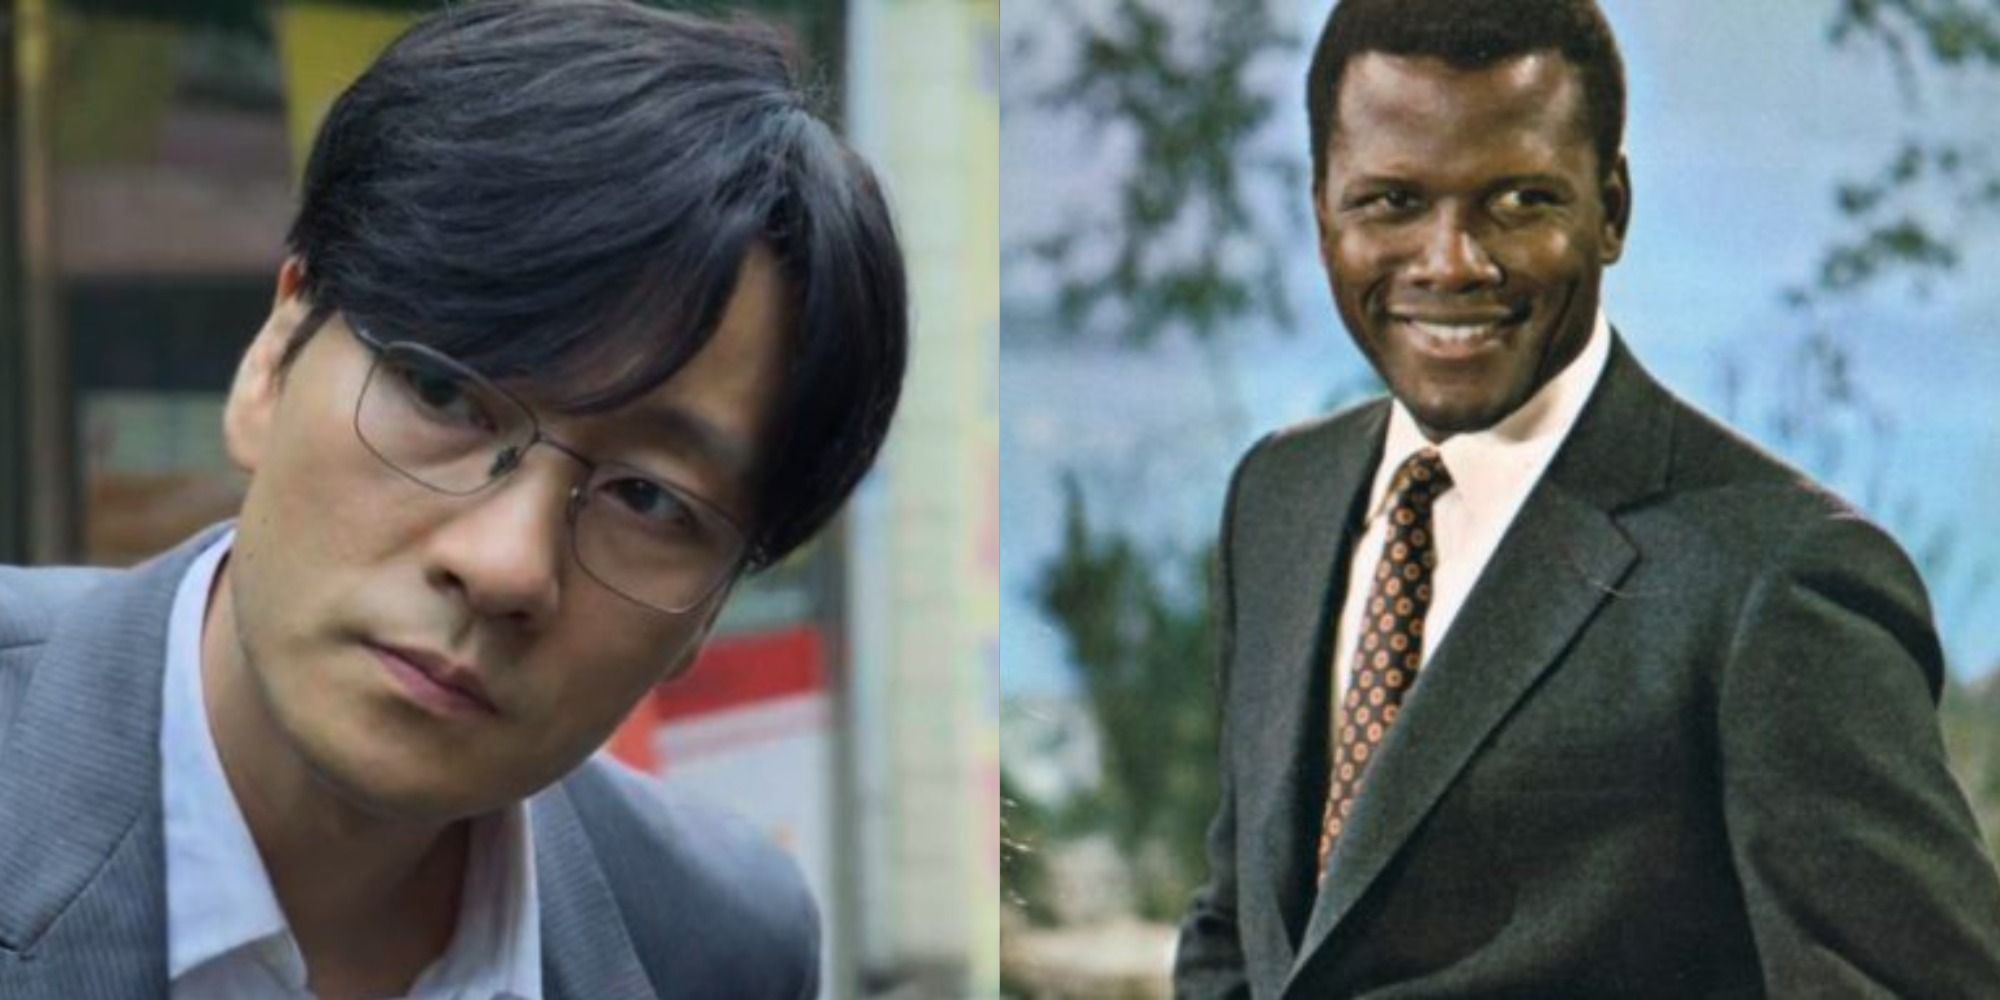 Park Hae-Soo as Cho Sang-woo in Squid Game and Sidney Poitier as Virgil Tibbs in They Call Me Mr. Tibbs!